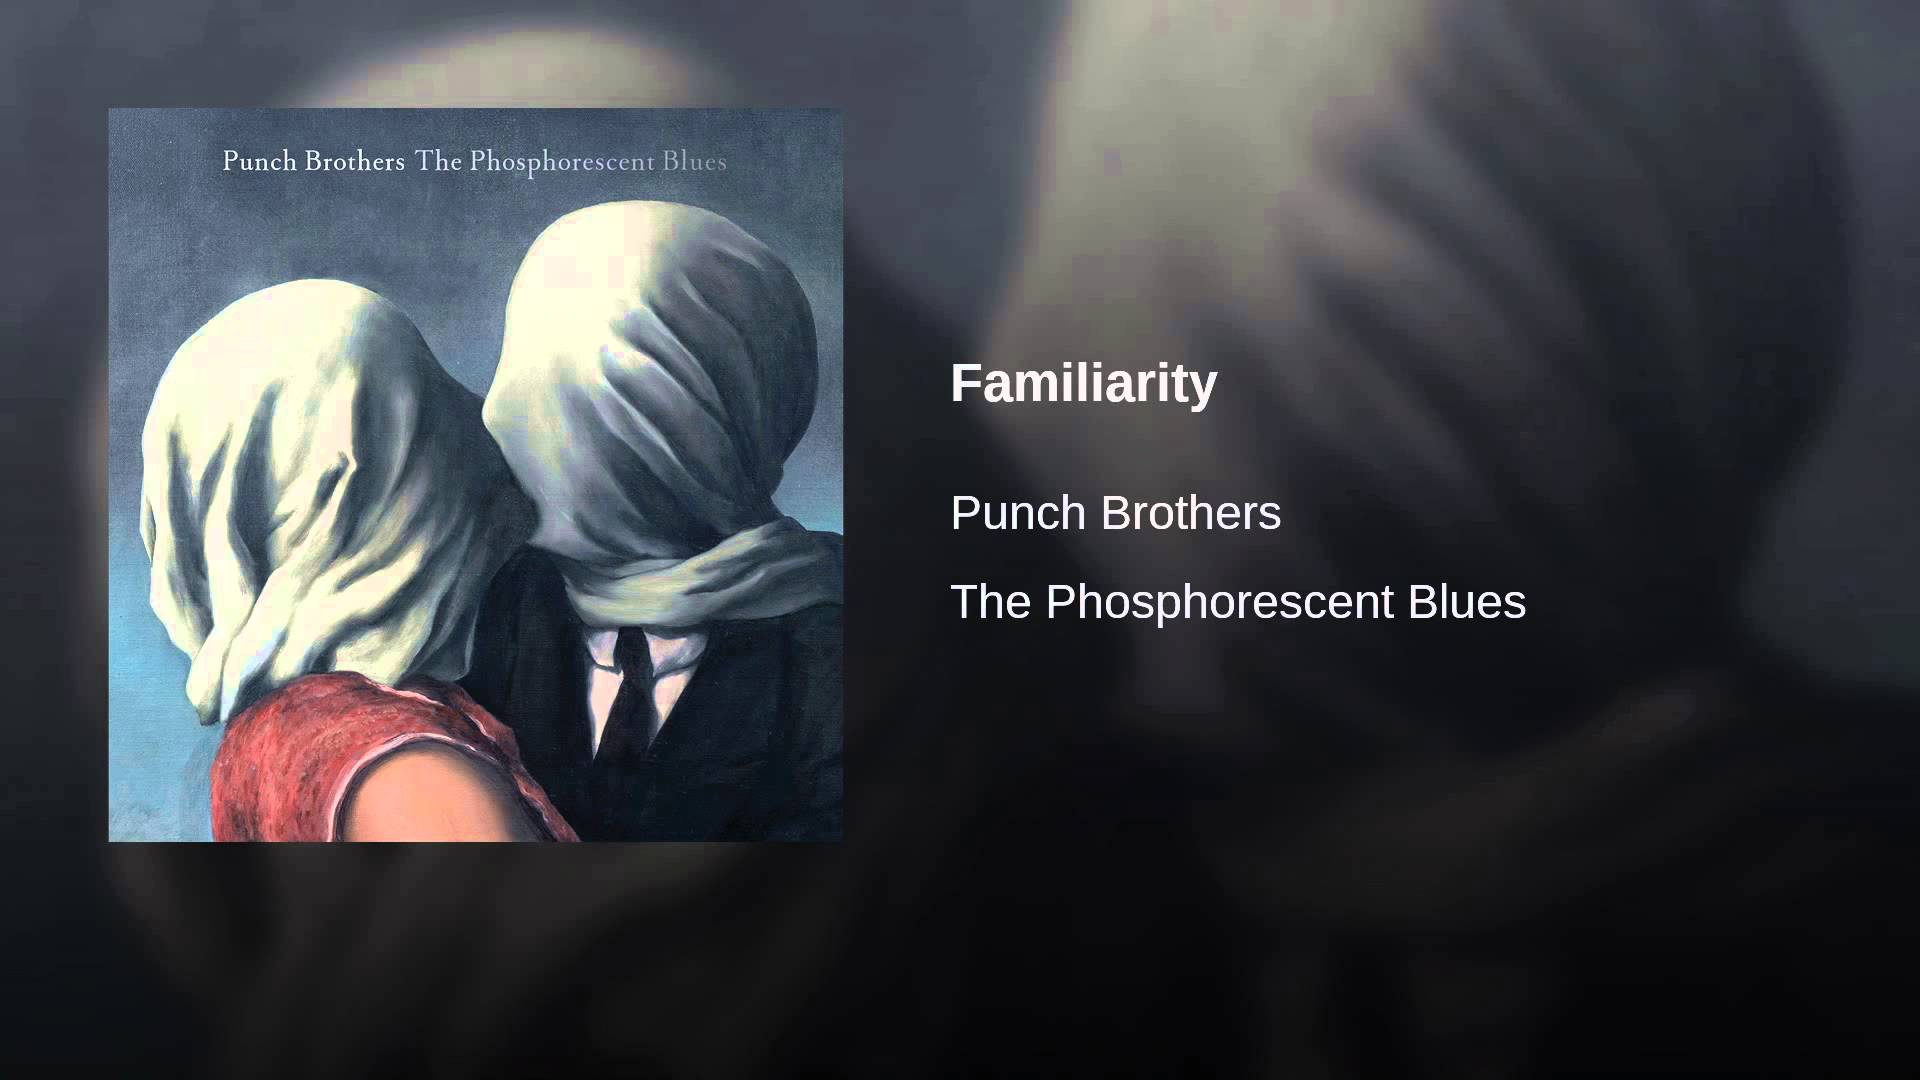 Punch Brothers: Familiarity